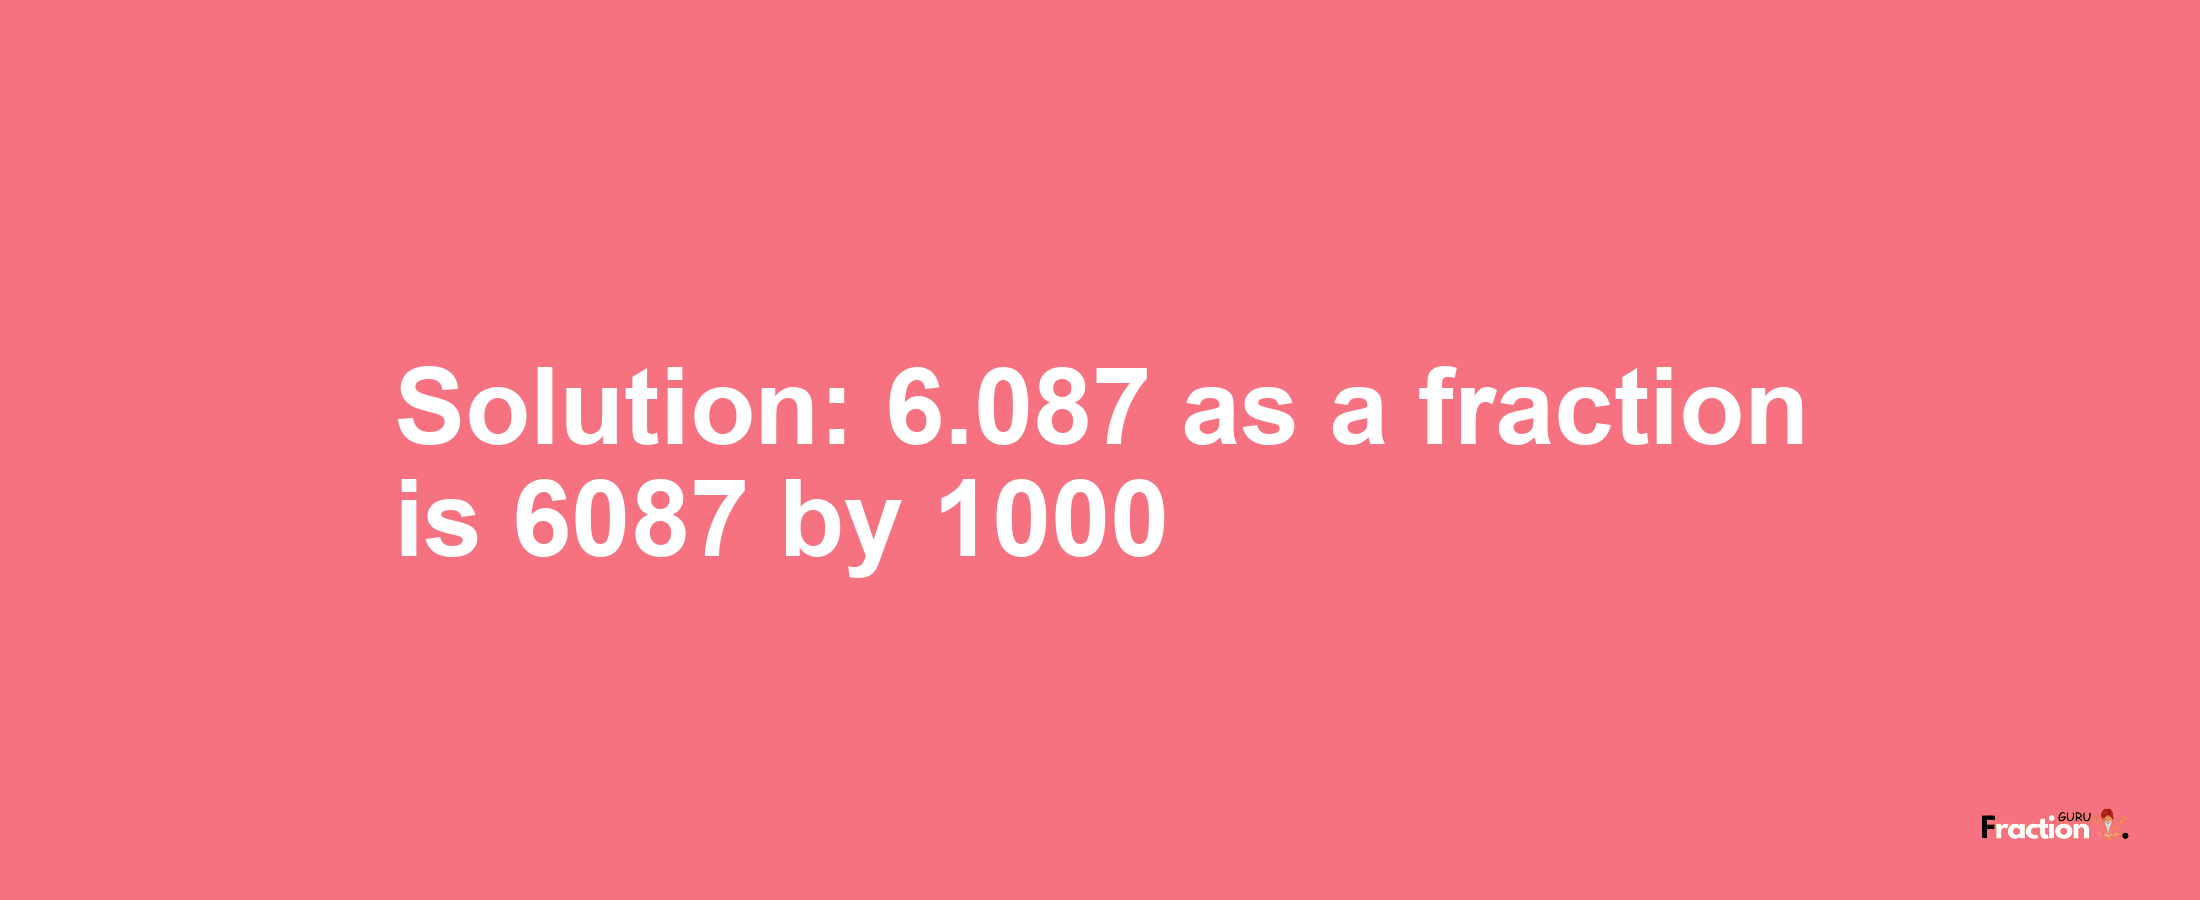 Solution:6.087 as a fraction is 6087/1000